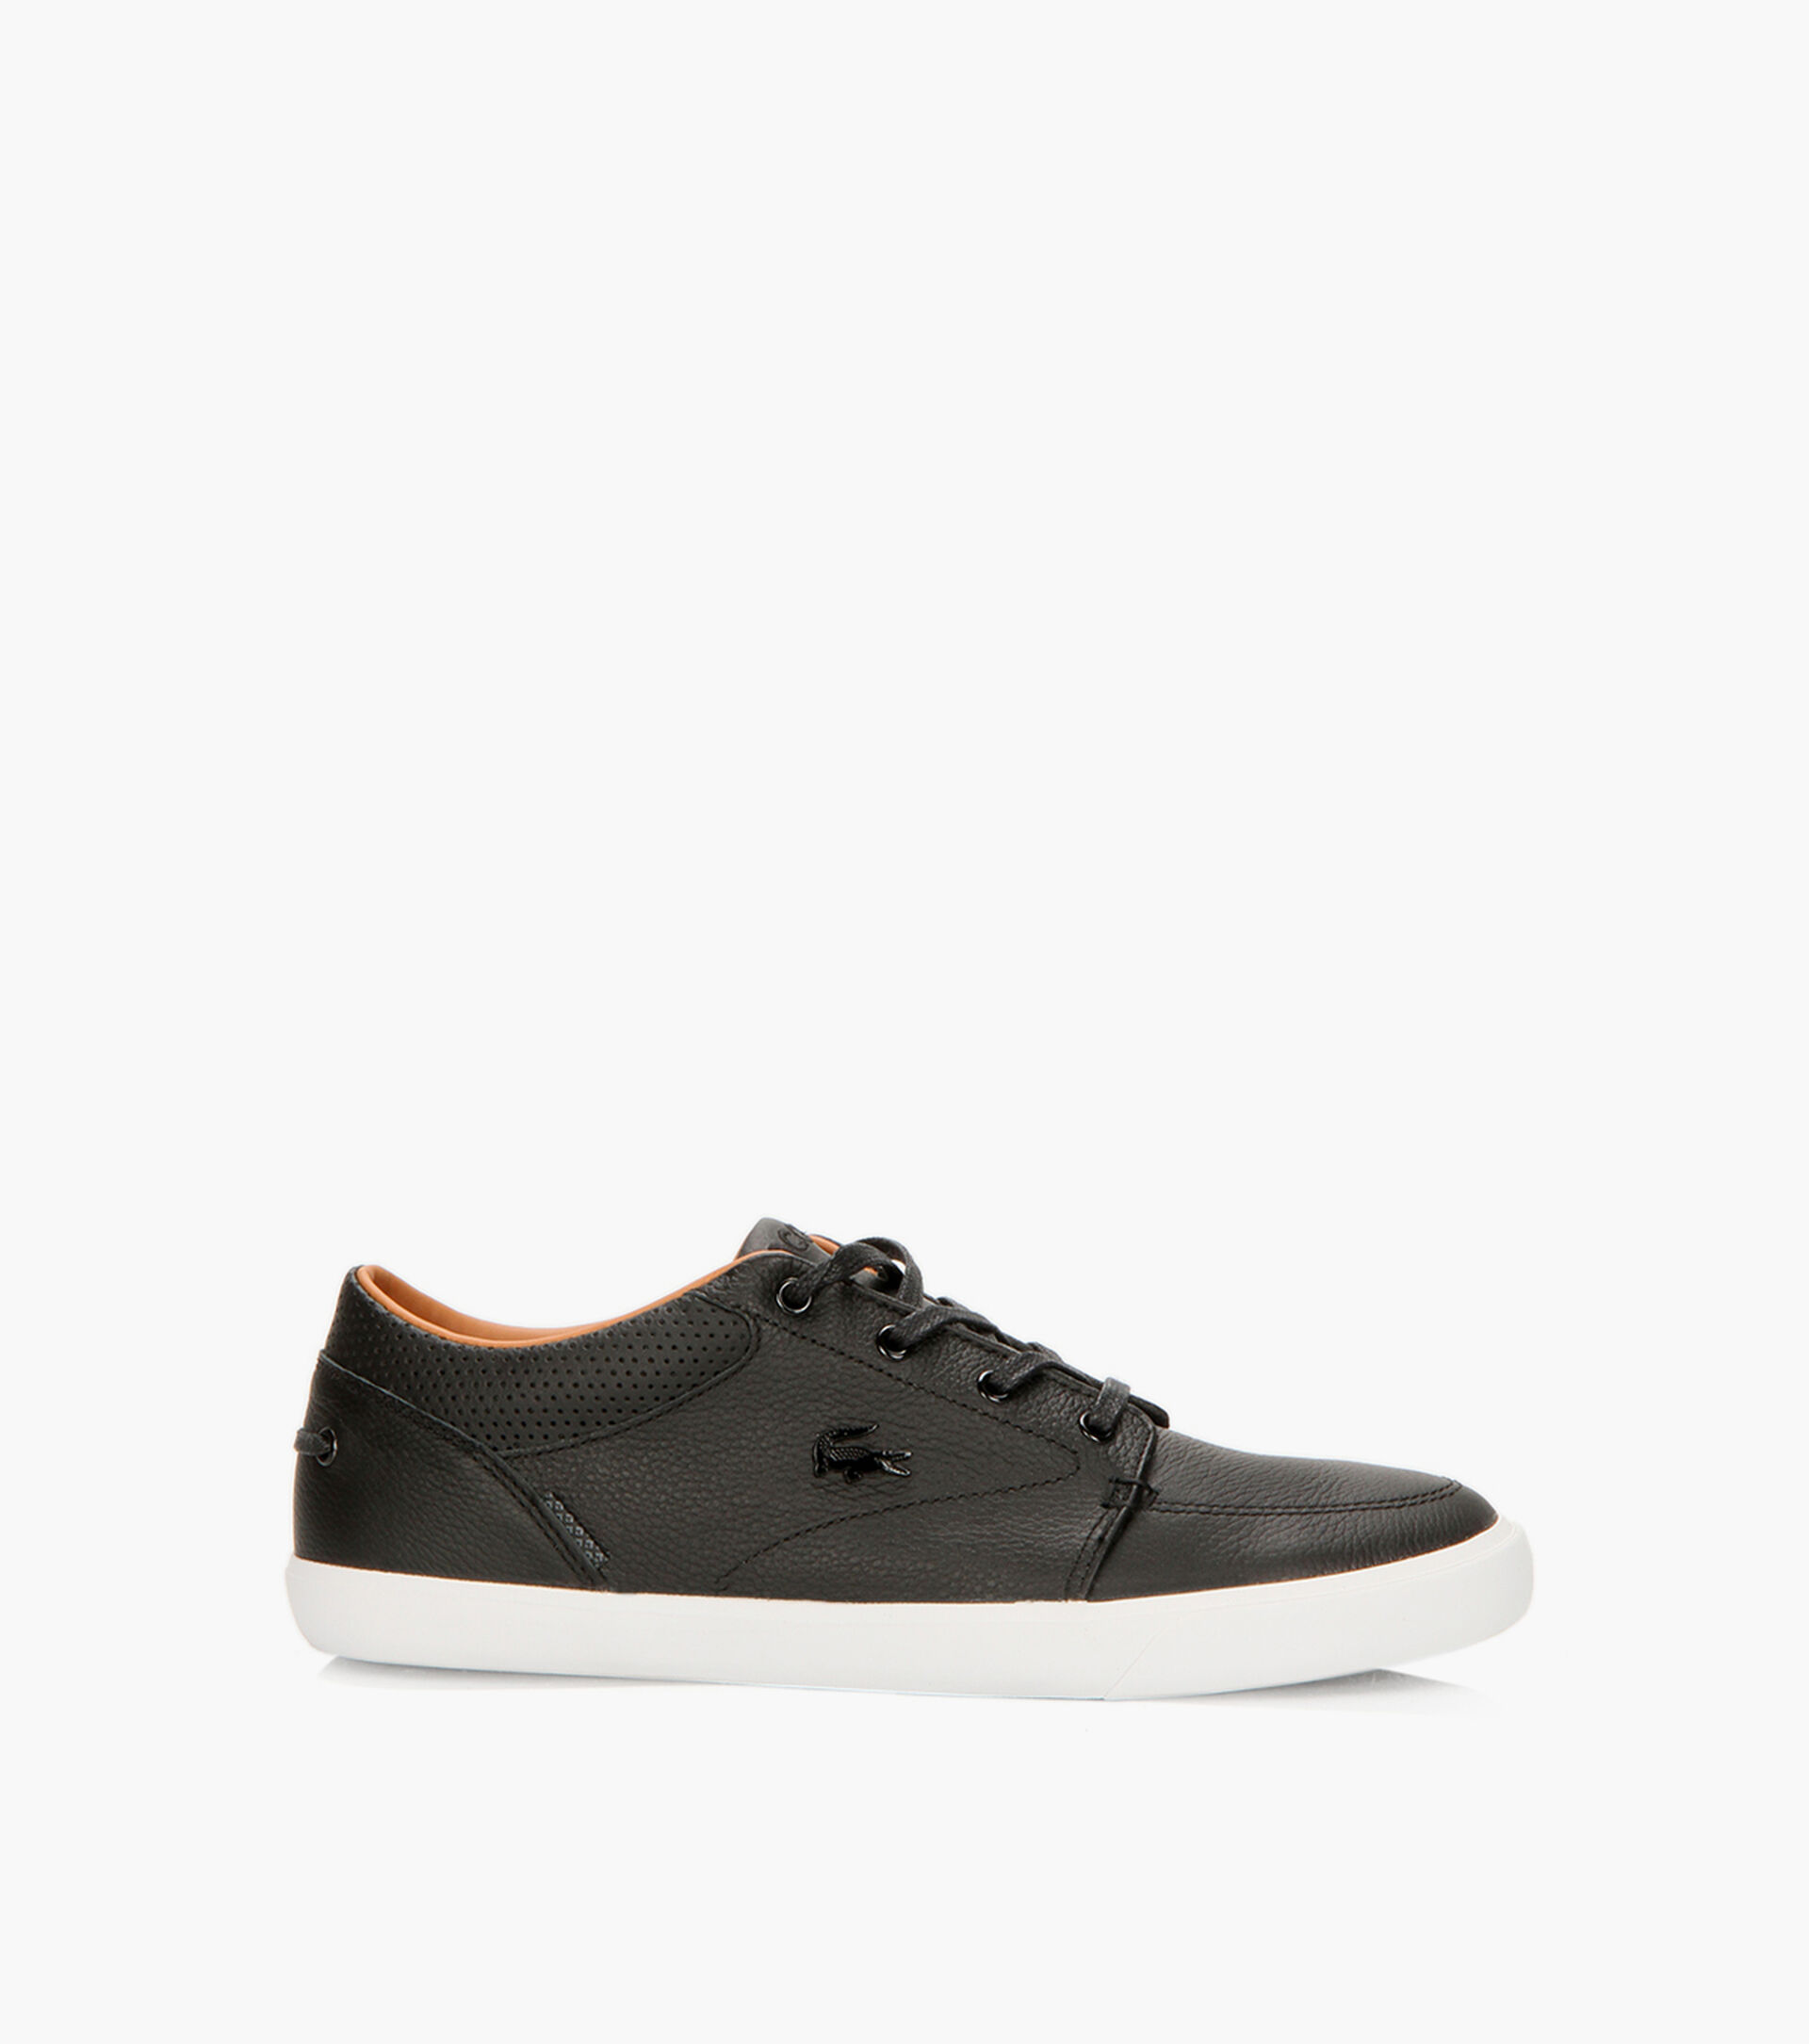 LACOSTE BAYLISS - Black Leather | Browns Shoes